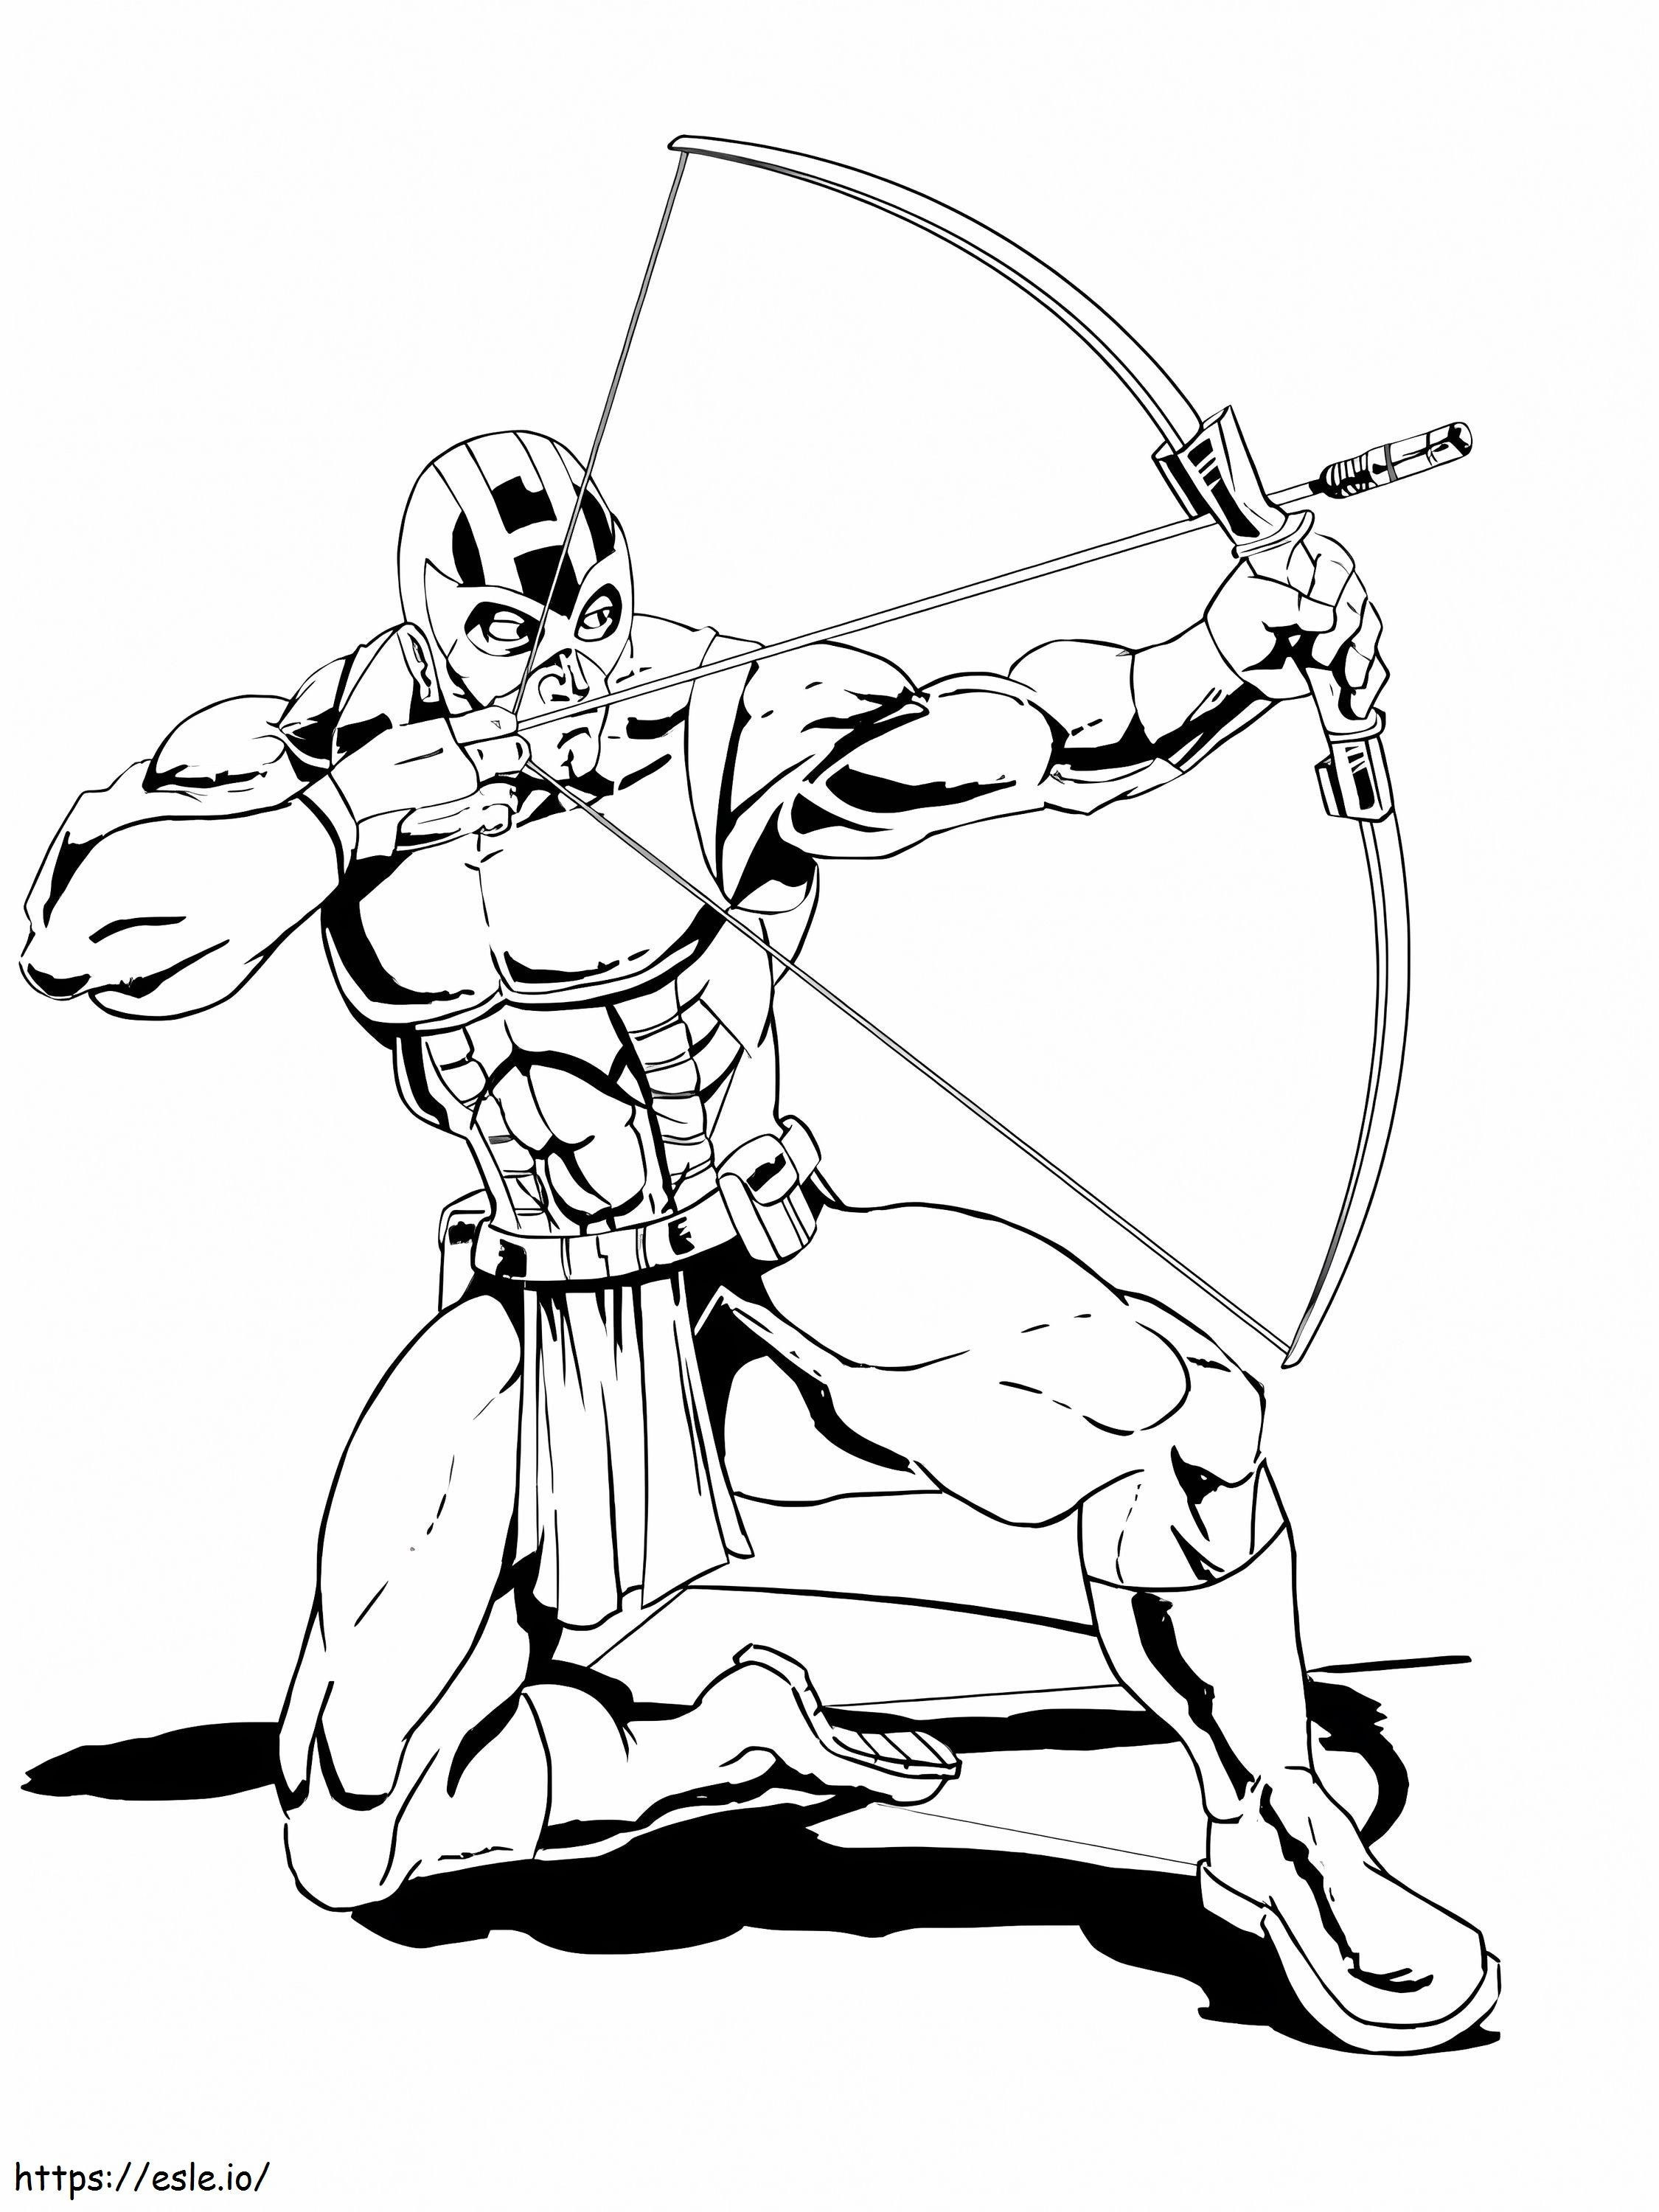 Cartoon Hawkeye Fight coloring page